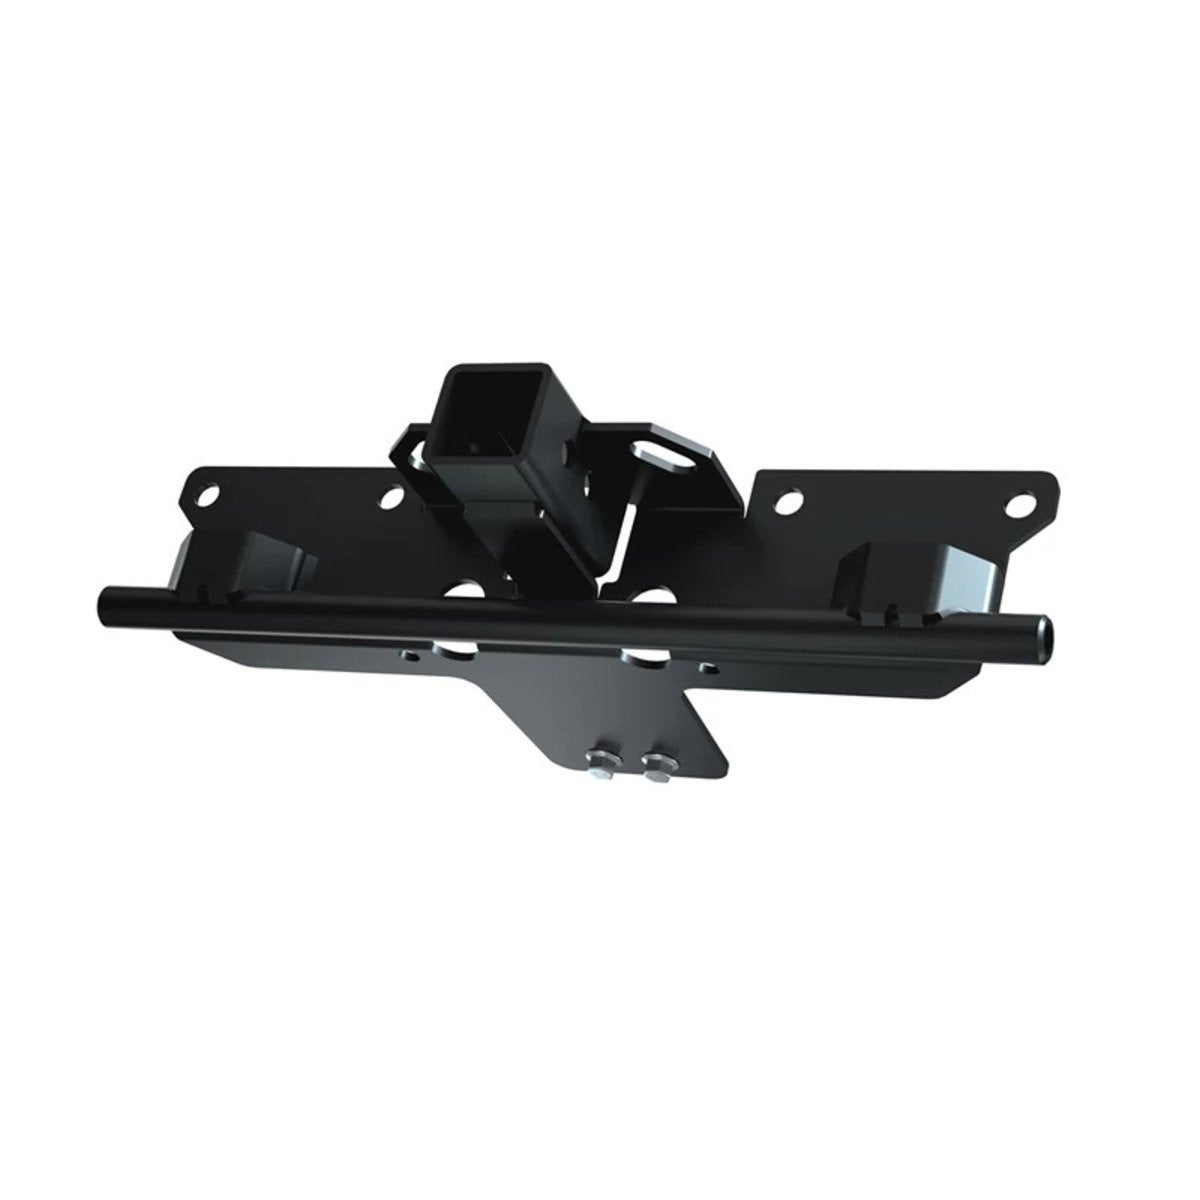 Kolpin Arctic Cat Prowler Pro Front Connect Snow Plow Mounting Bracket